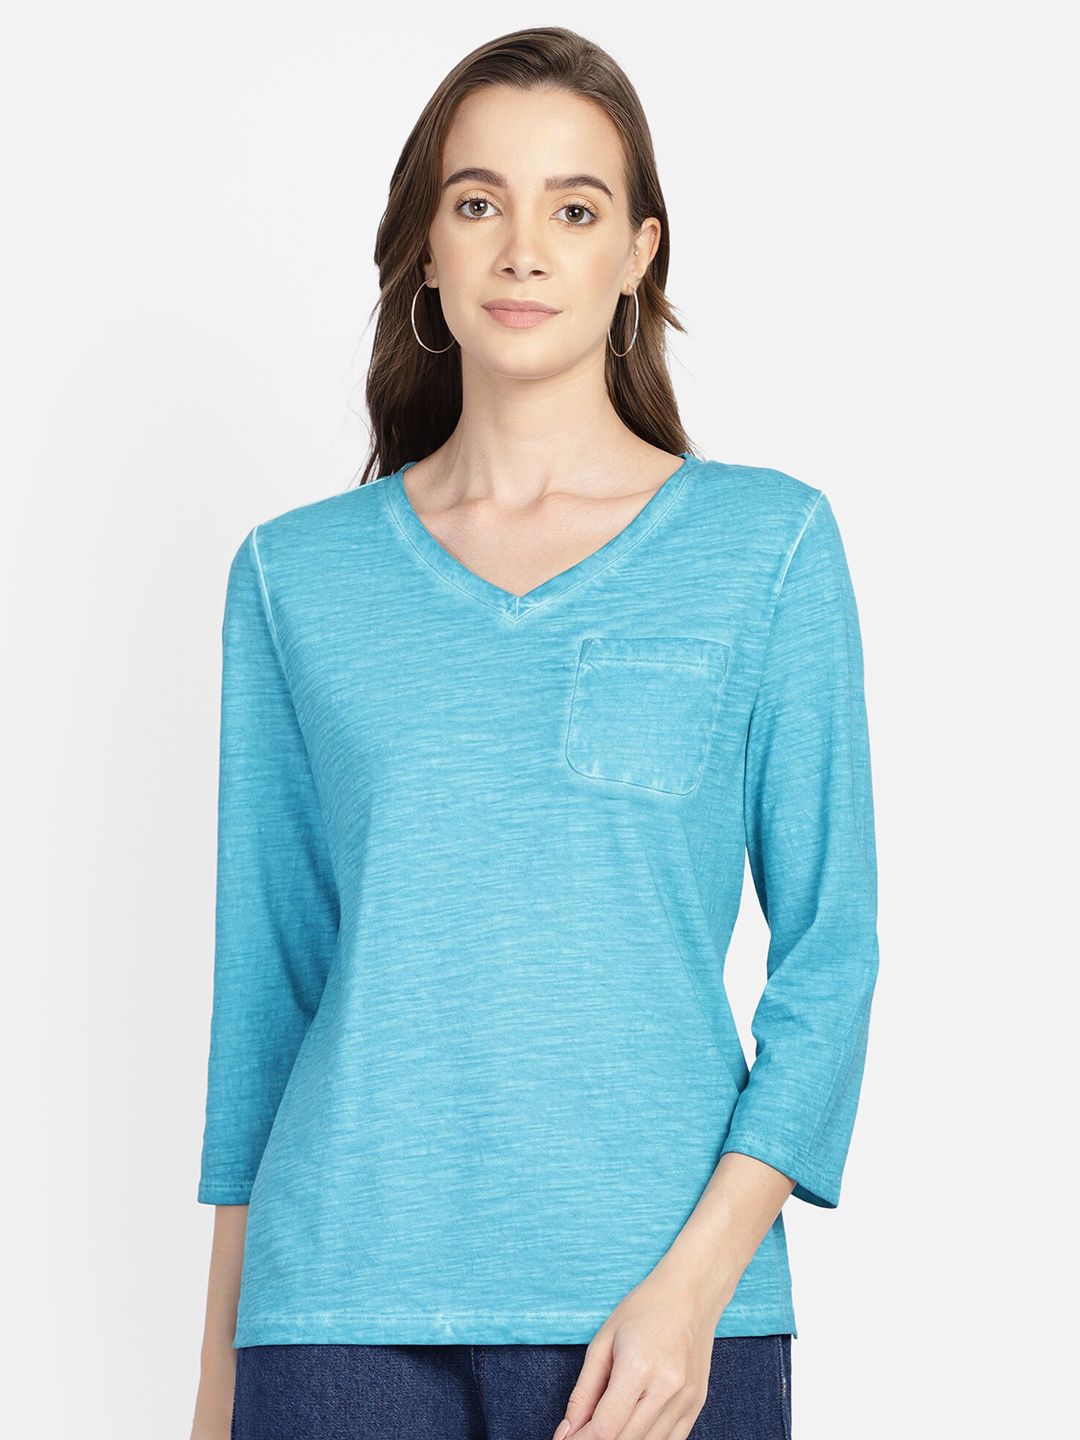 Aditi Wasan Turquoise Blue Pure Cotton Solid Top Price in India